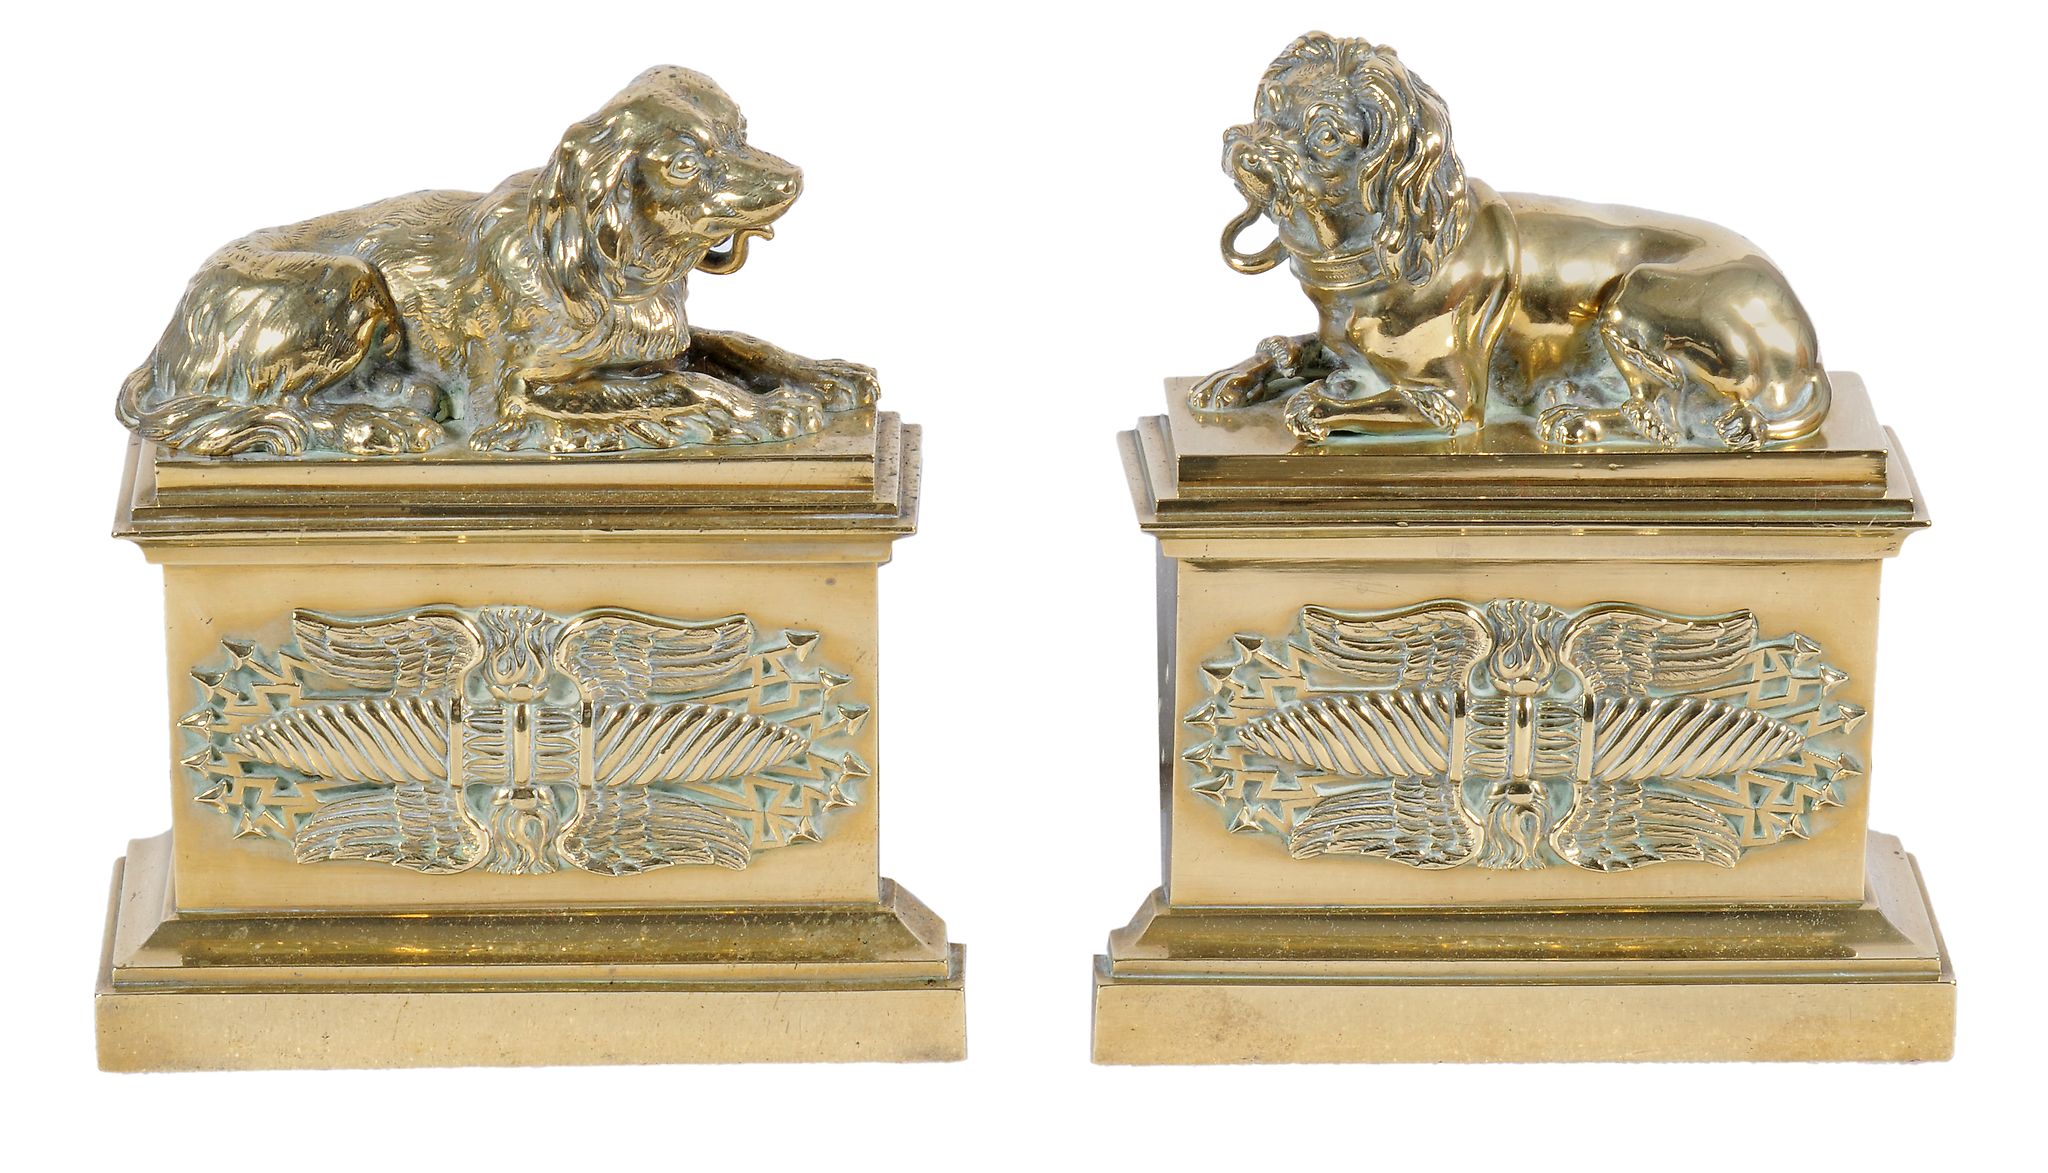 A pair of gilt bronze chenets, third quarter 19th century, one with a recumbent poodle and one